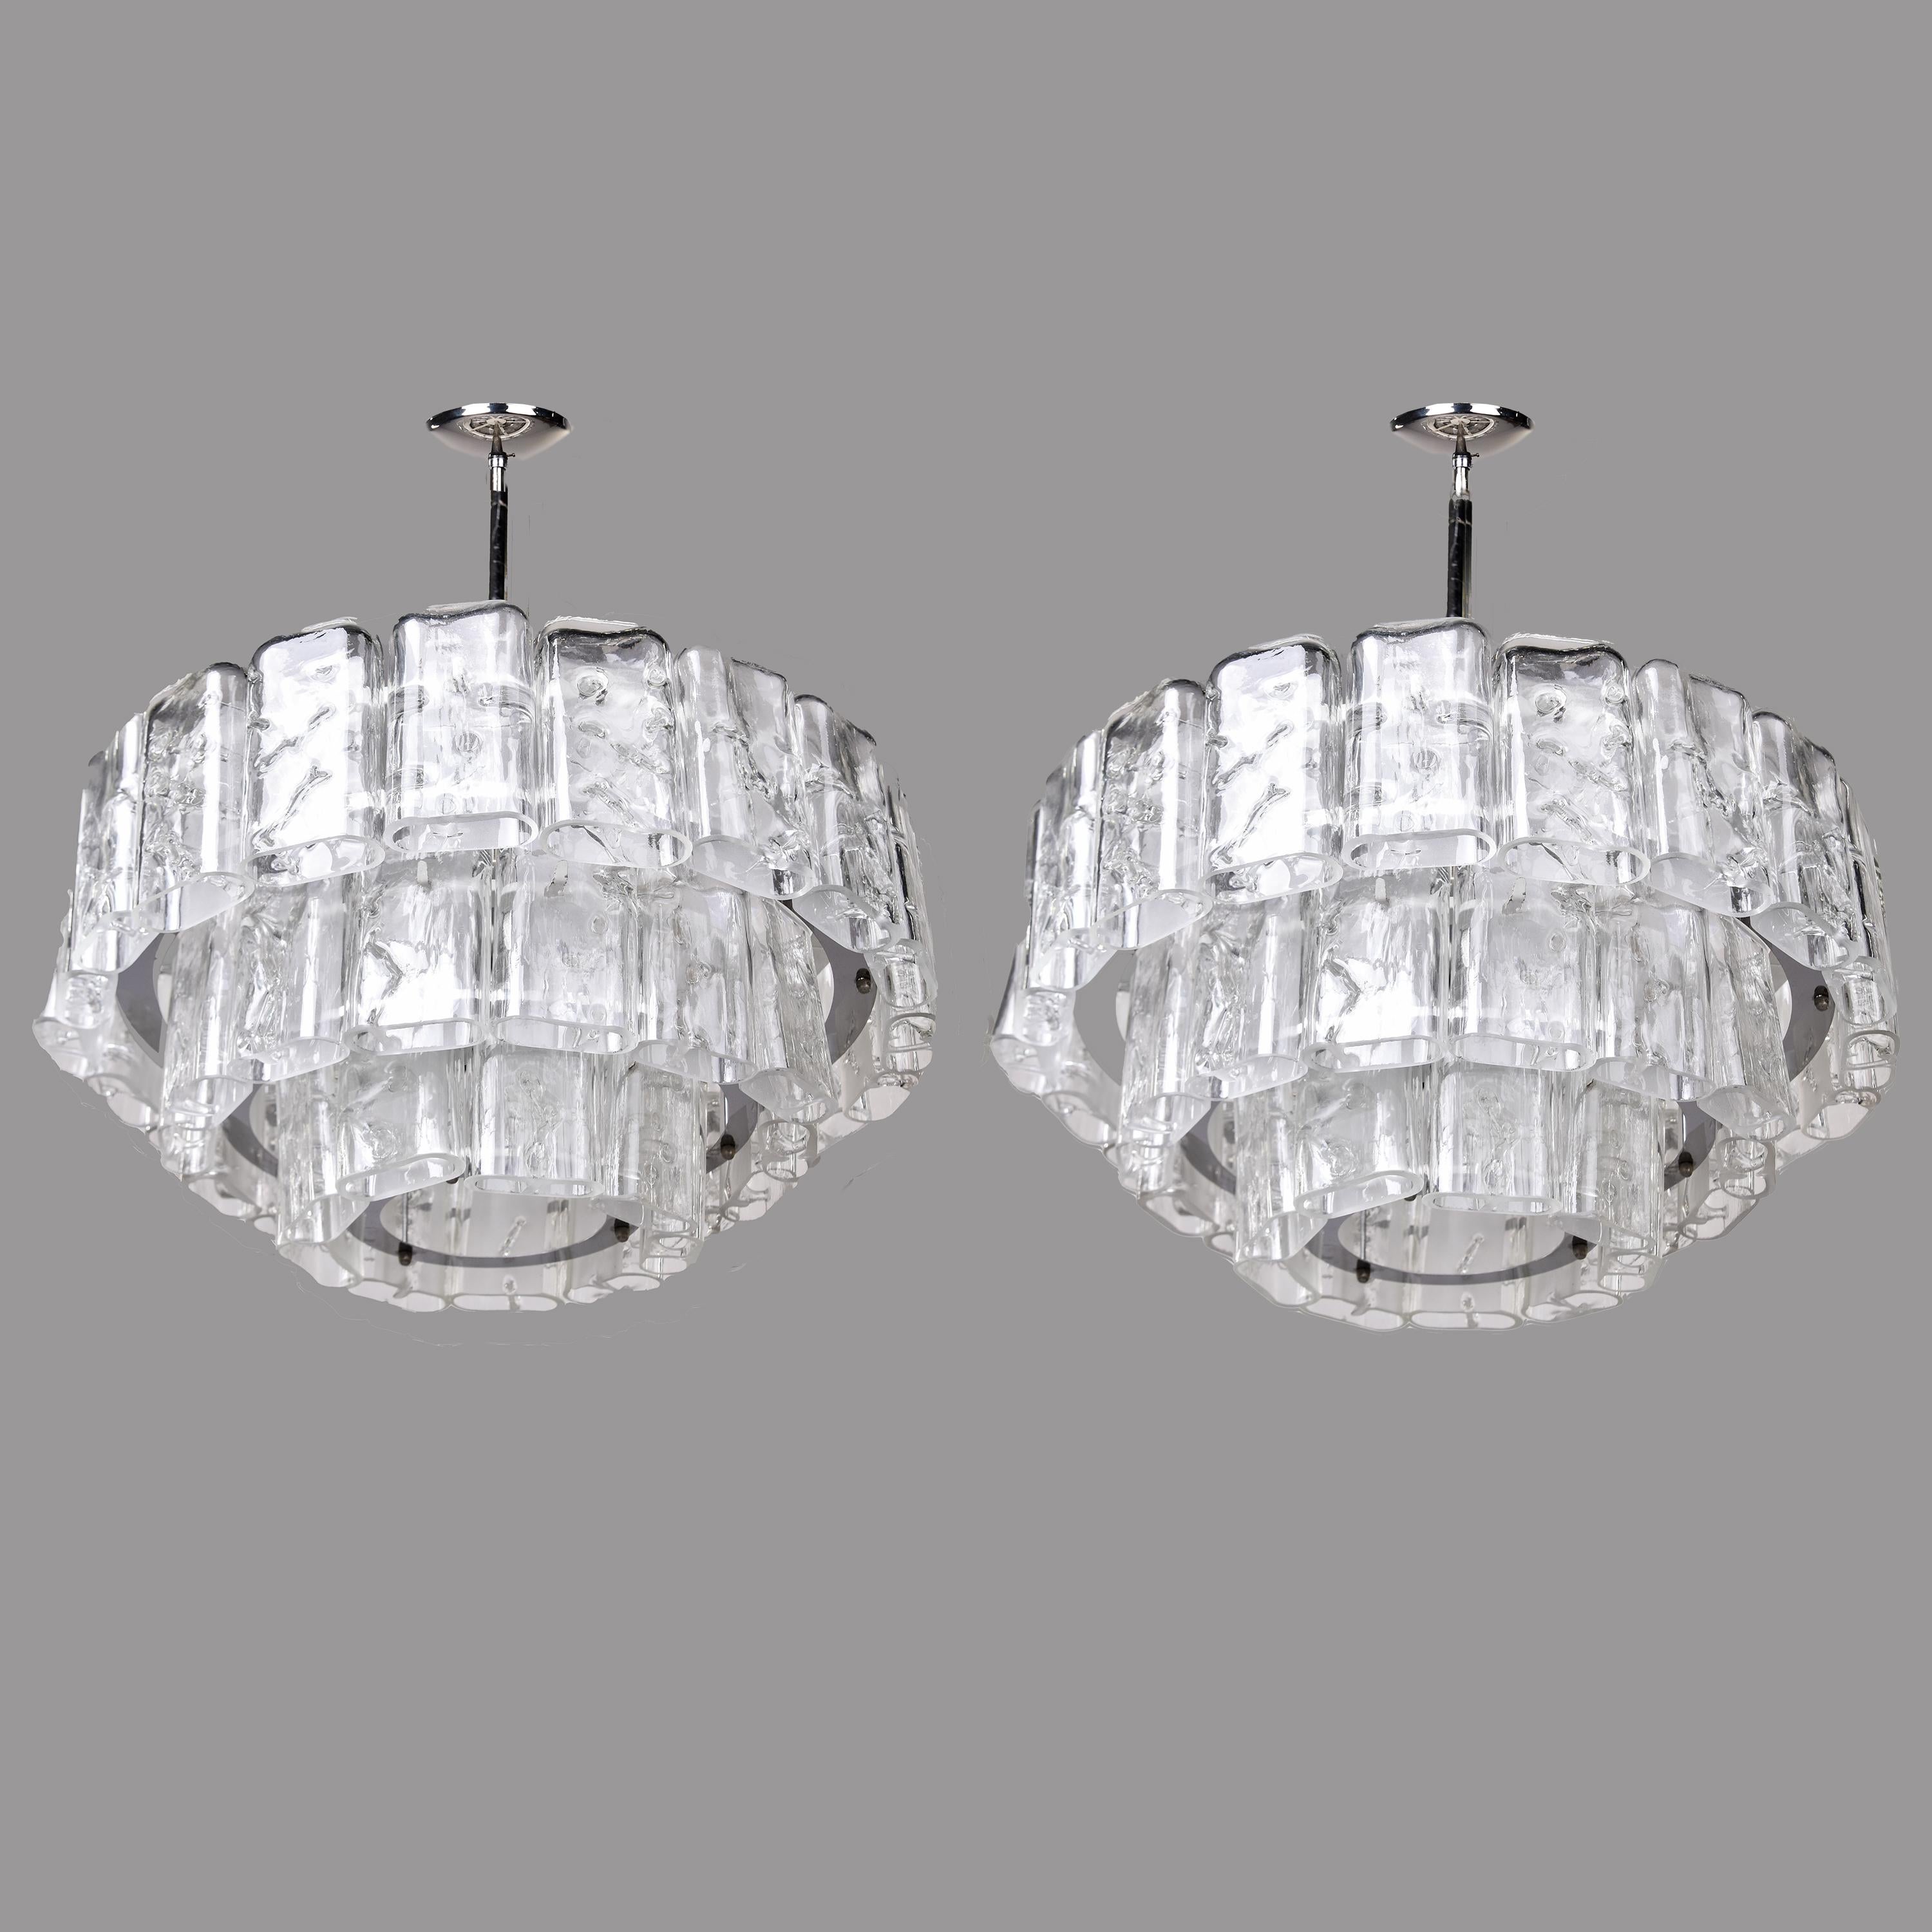 This pair of three tier modernist chandeliers by German maker Doria dates from the 1960s. Chandliers have metal frames with three graduated tiers of clear, oblong shaped glass pendants that have an icy appearance and polished edges. Each fixture has